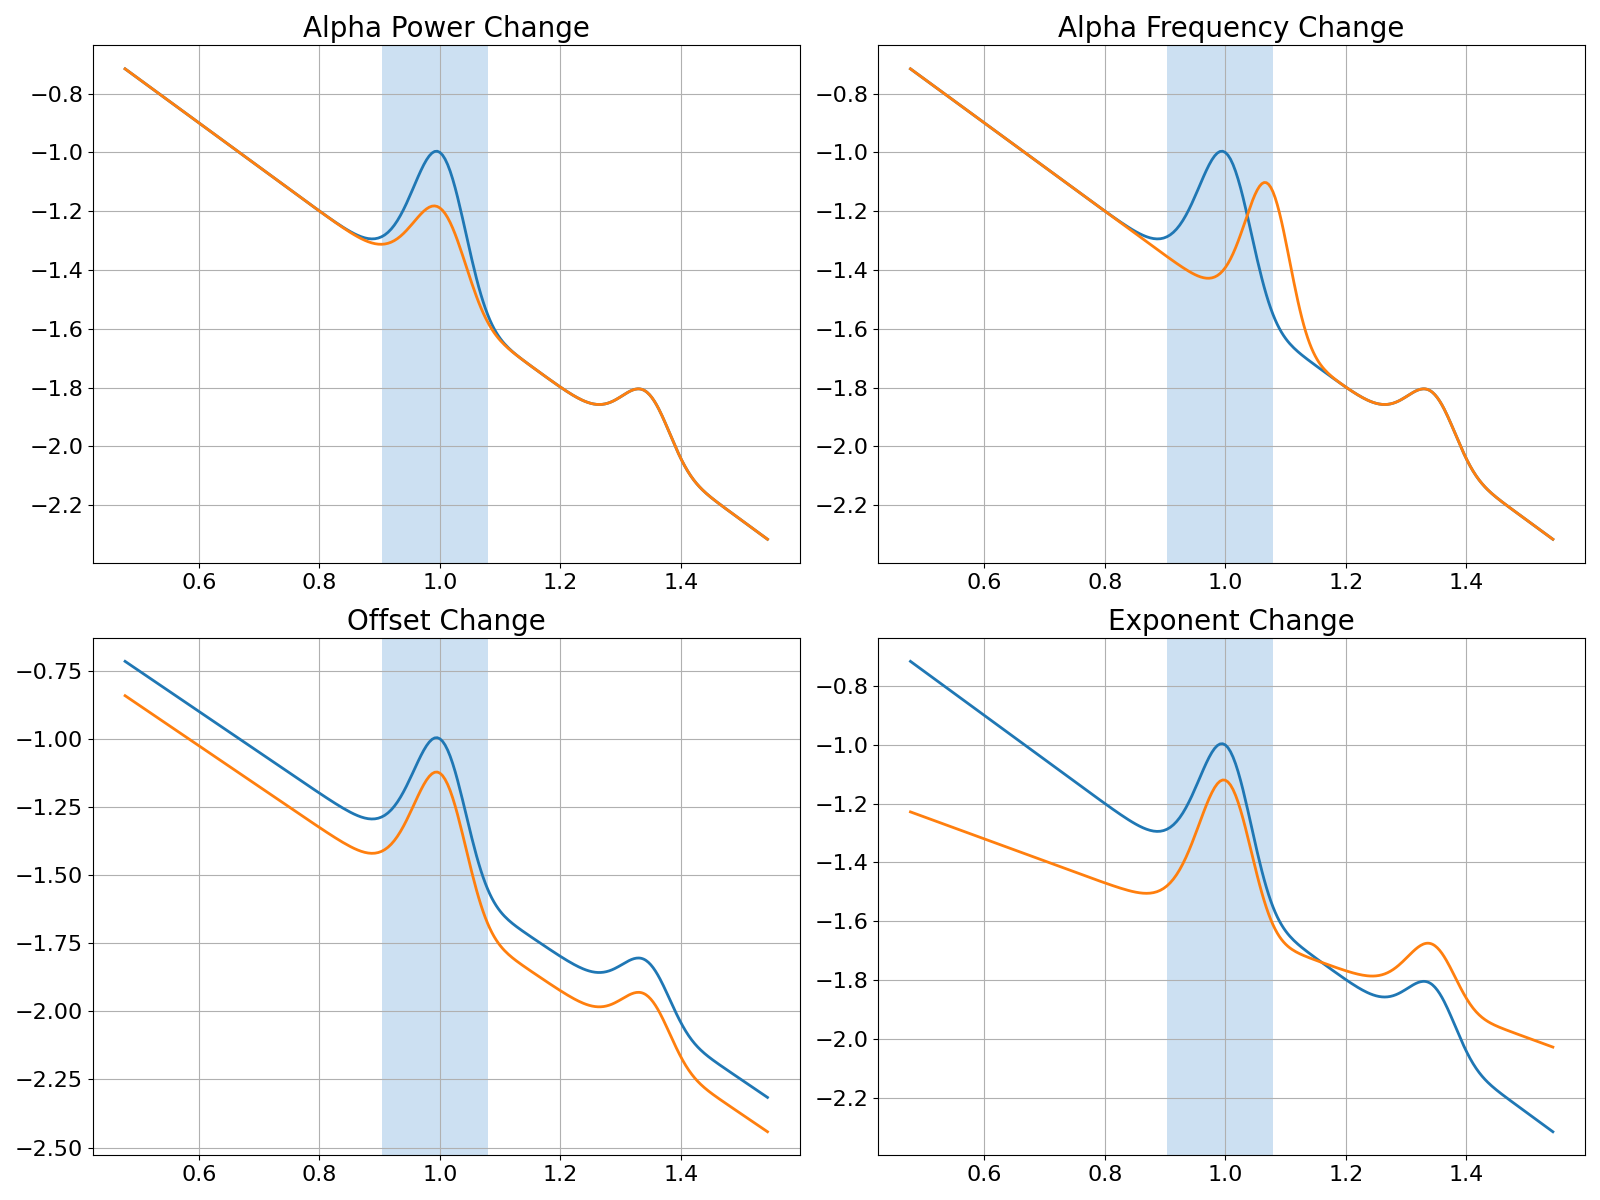 Alpha Power Change, Alpha Frequency Change, Offset Change, Exponent Change